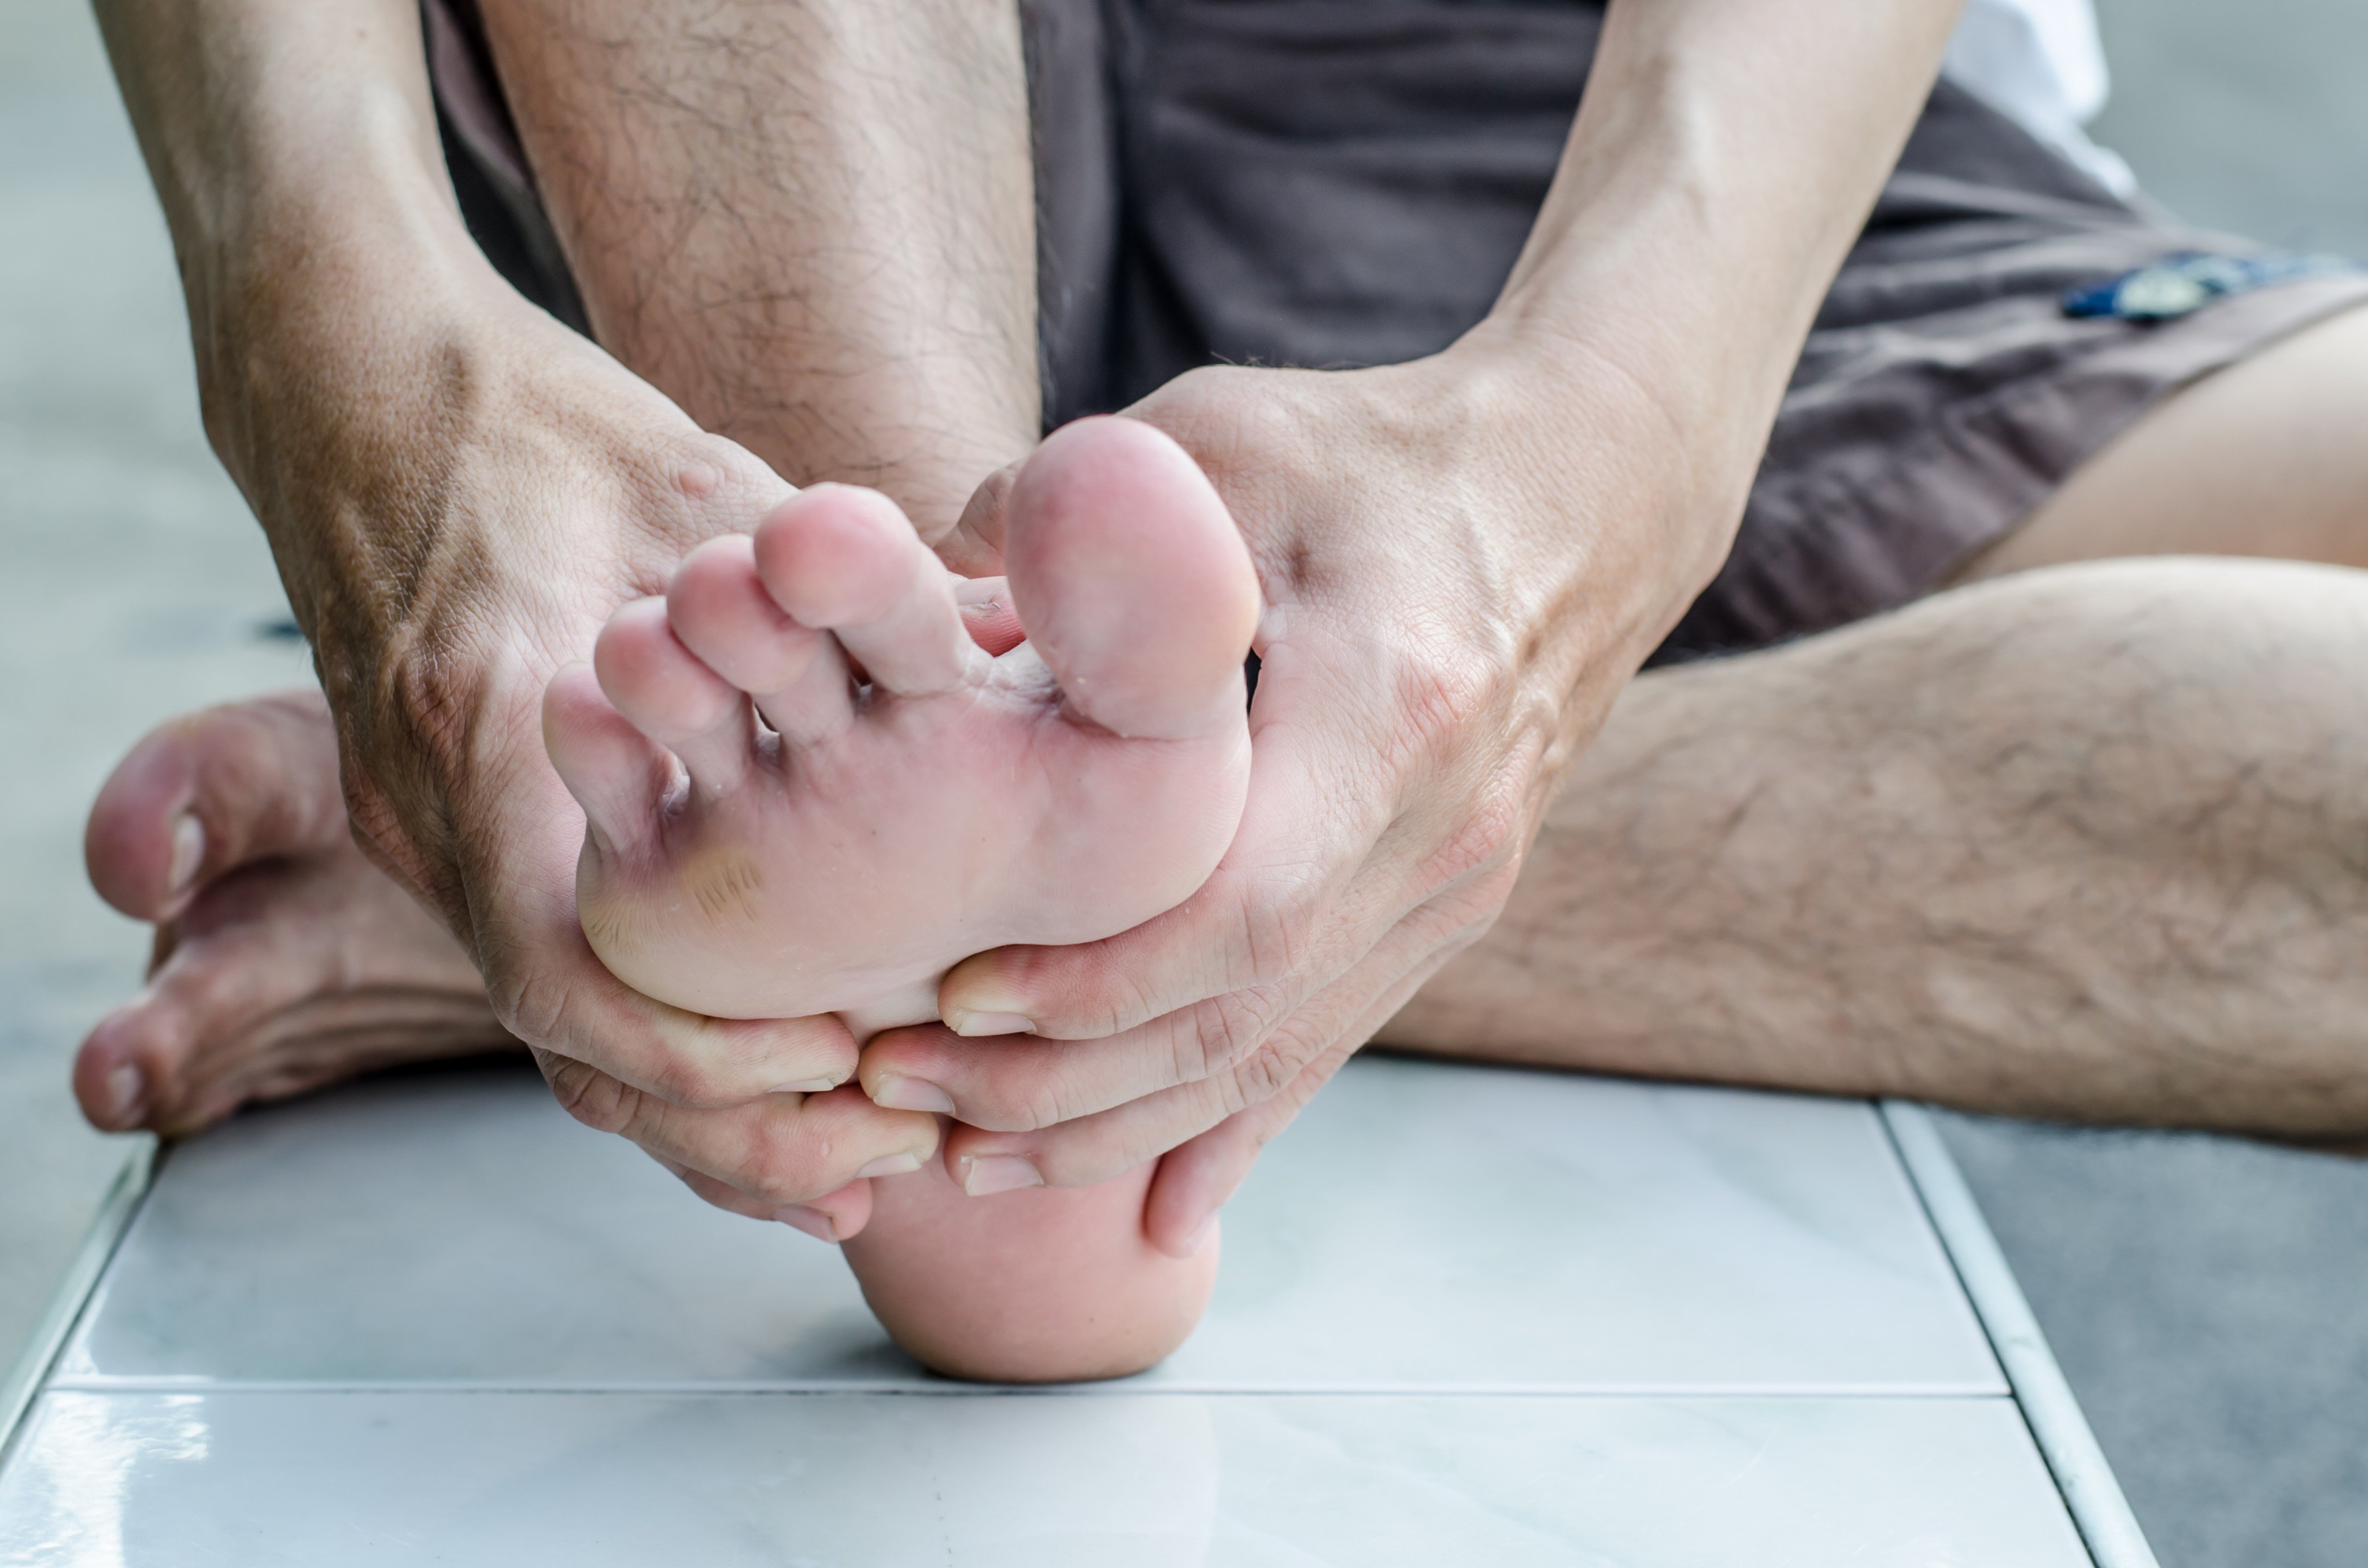 Do ingrown toenails go away? Treatment, prevention, and outlook